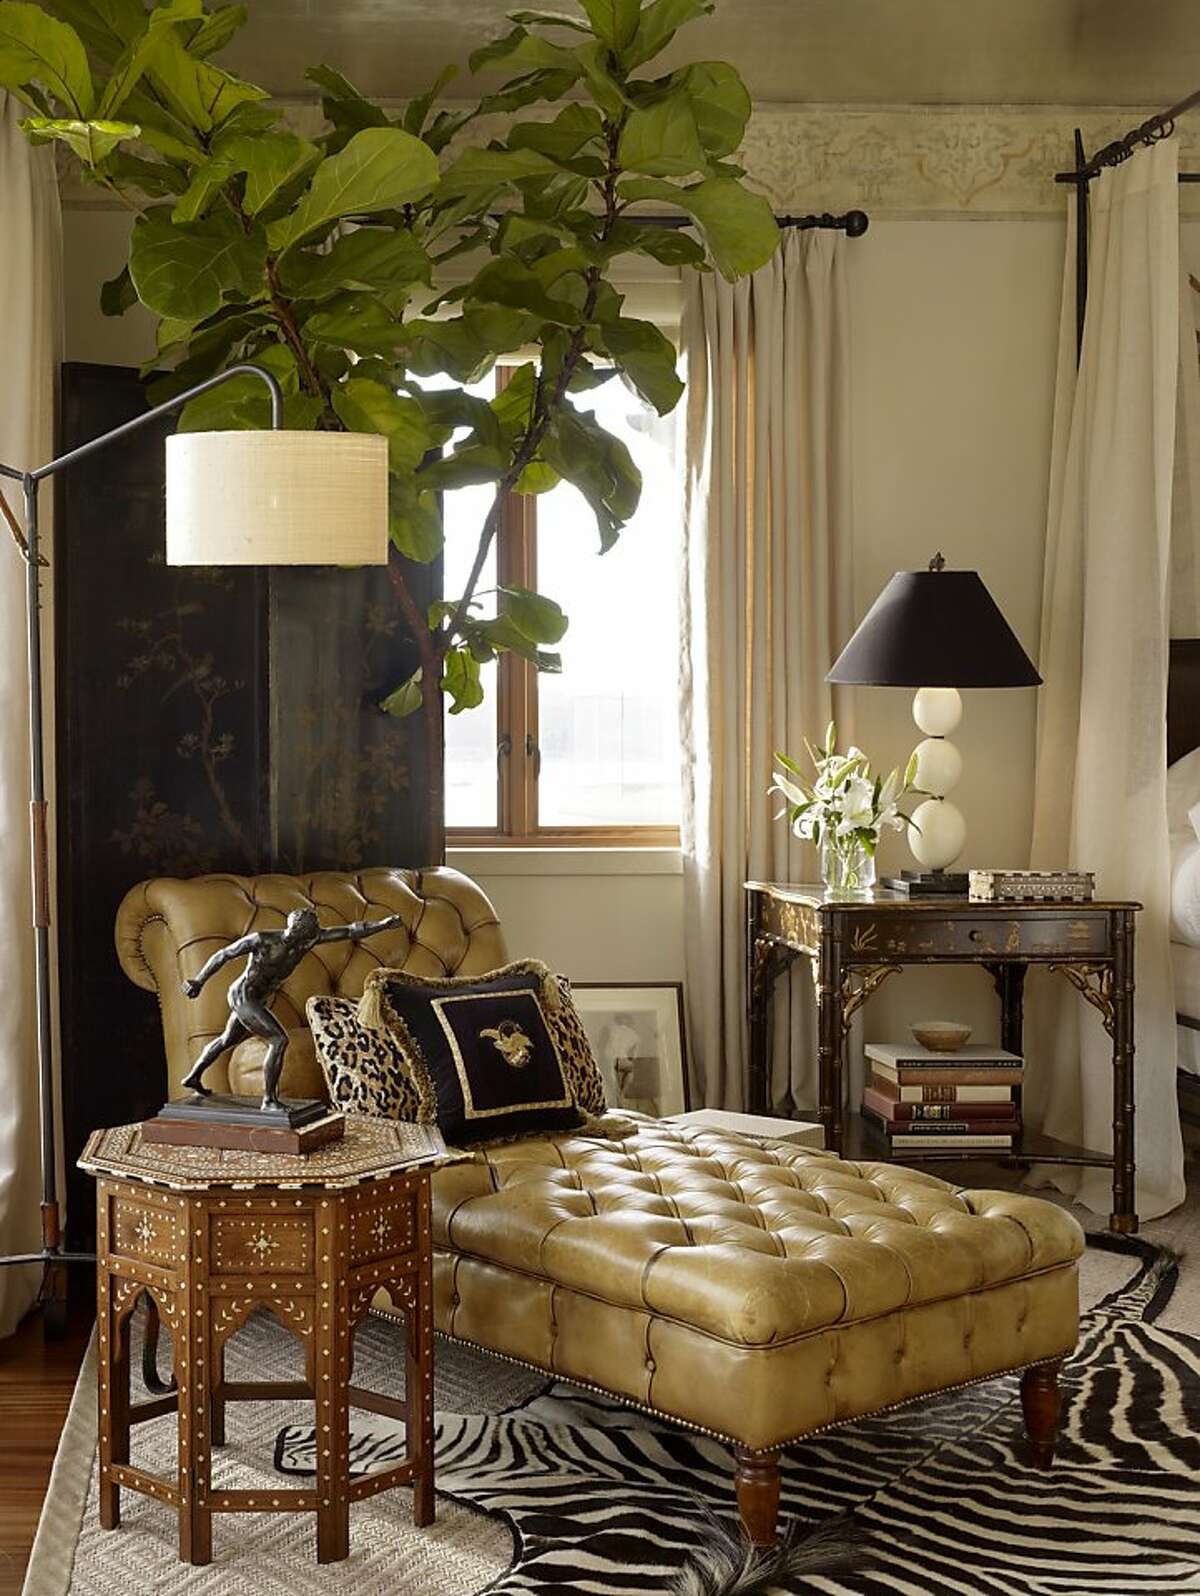 This room, designed by Cecilie Starin, was featured in the 2012 Marin Designer's Showcase in Belvedere.Ê